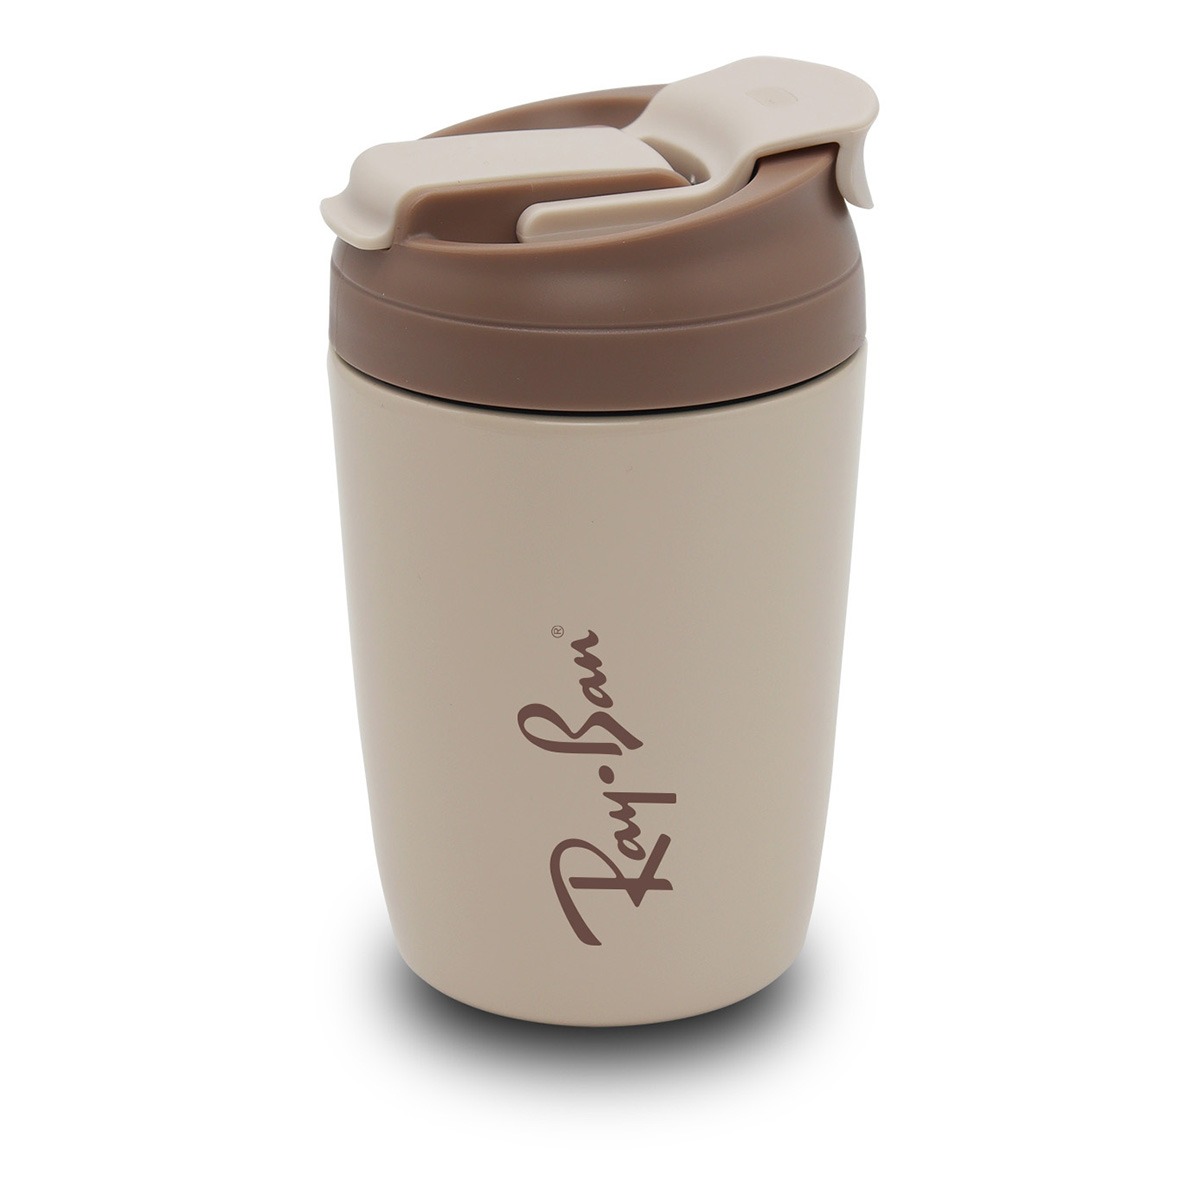 Olive Reusable Cup S903 | Brown Branded